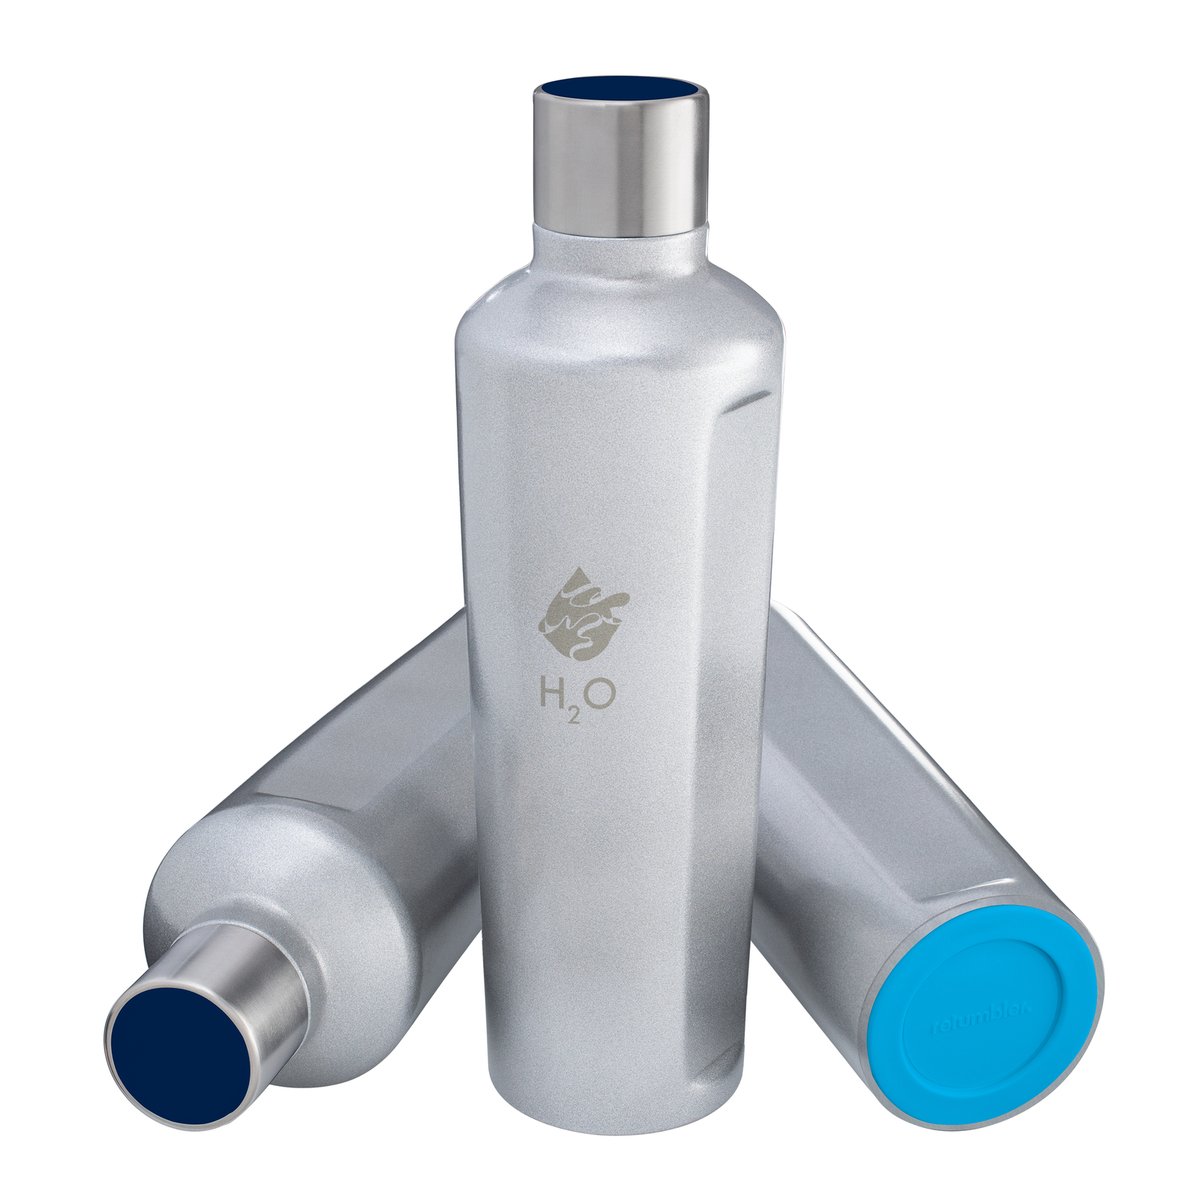 Thermotrinkflasche RETUMBLER-STEELONE "H2O" silber/blau veredeltes Muster